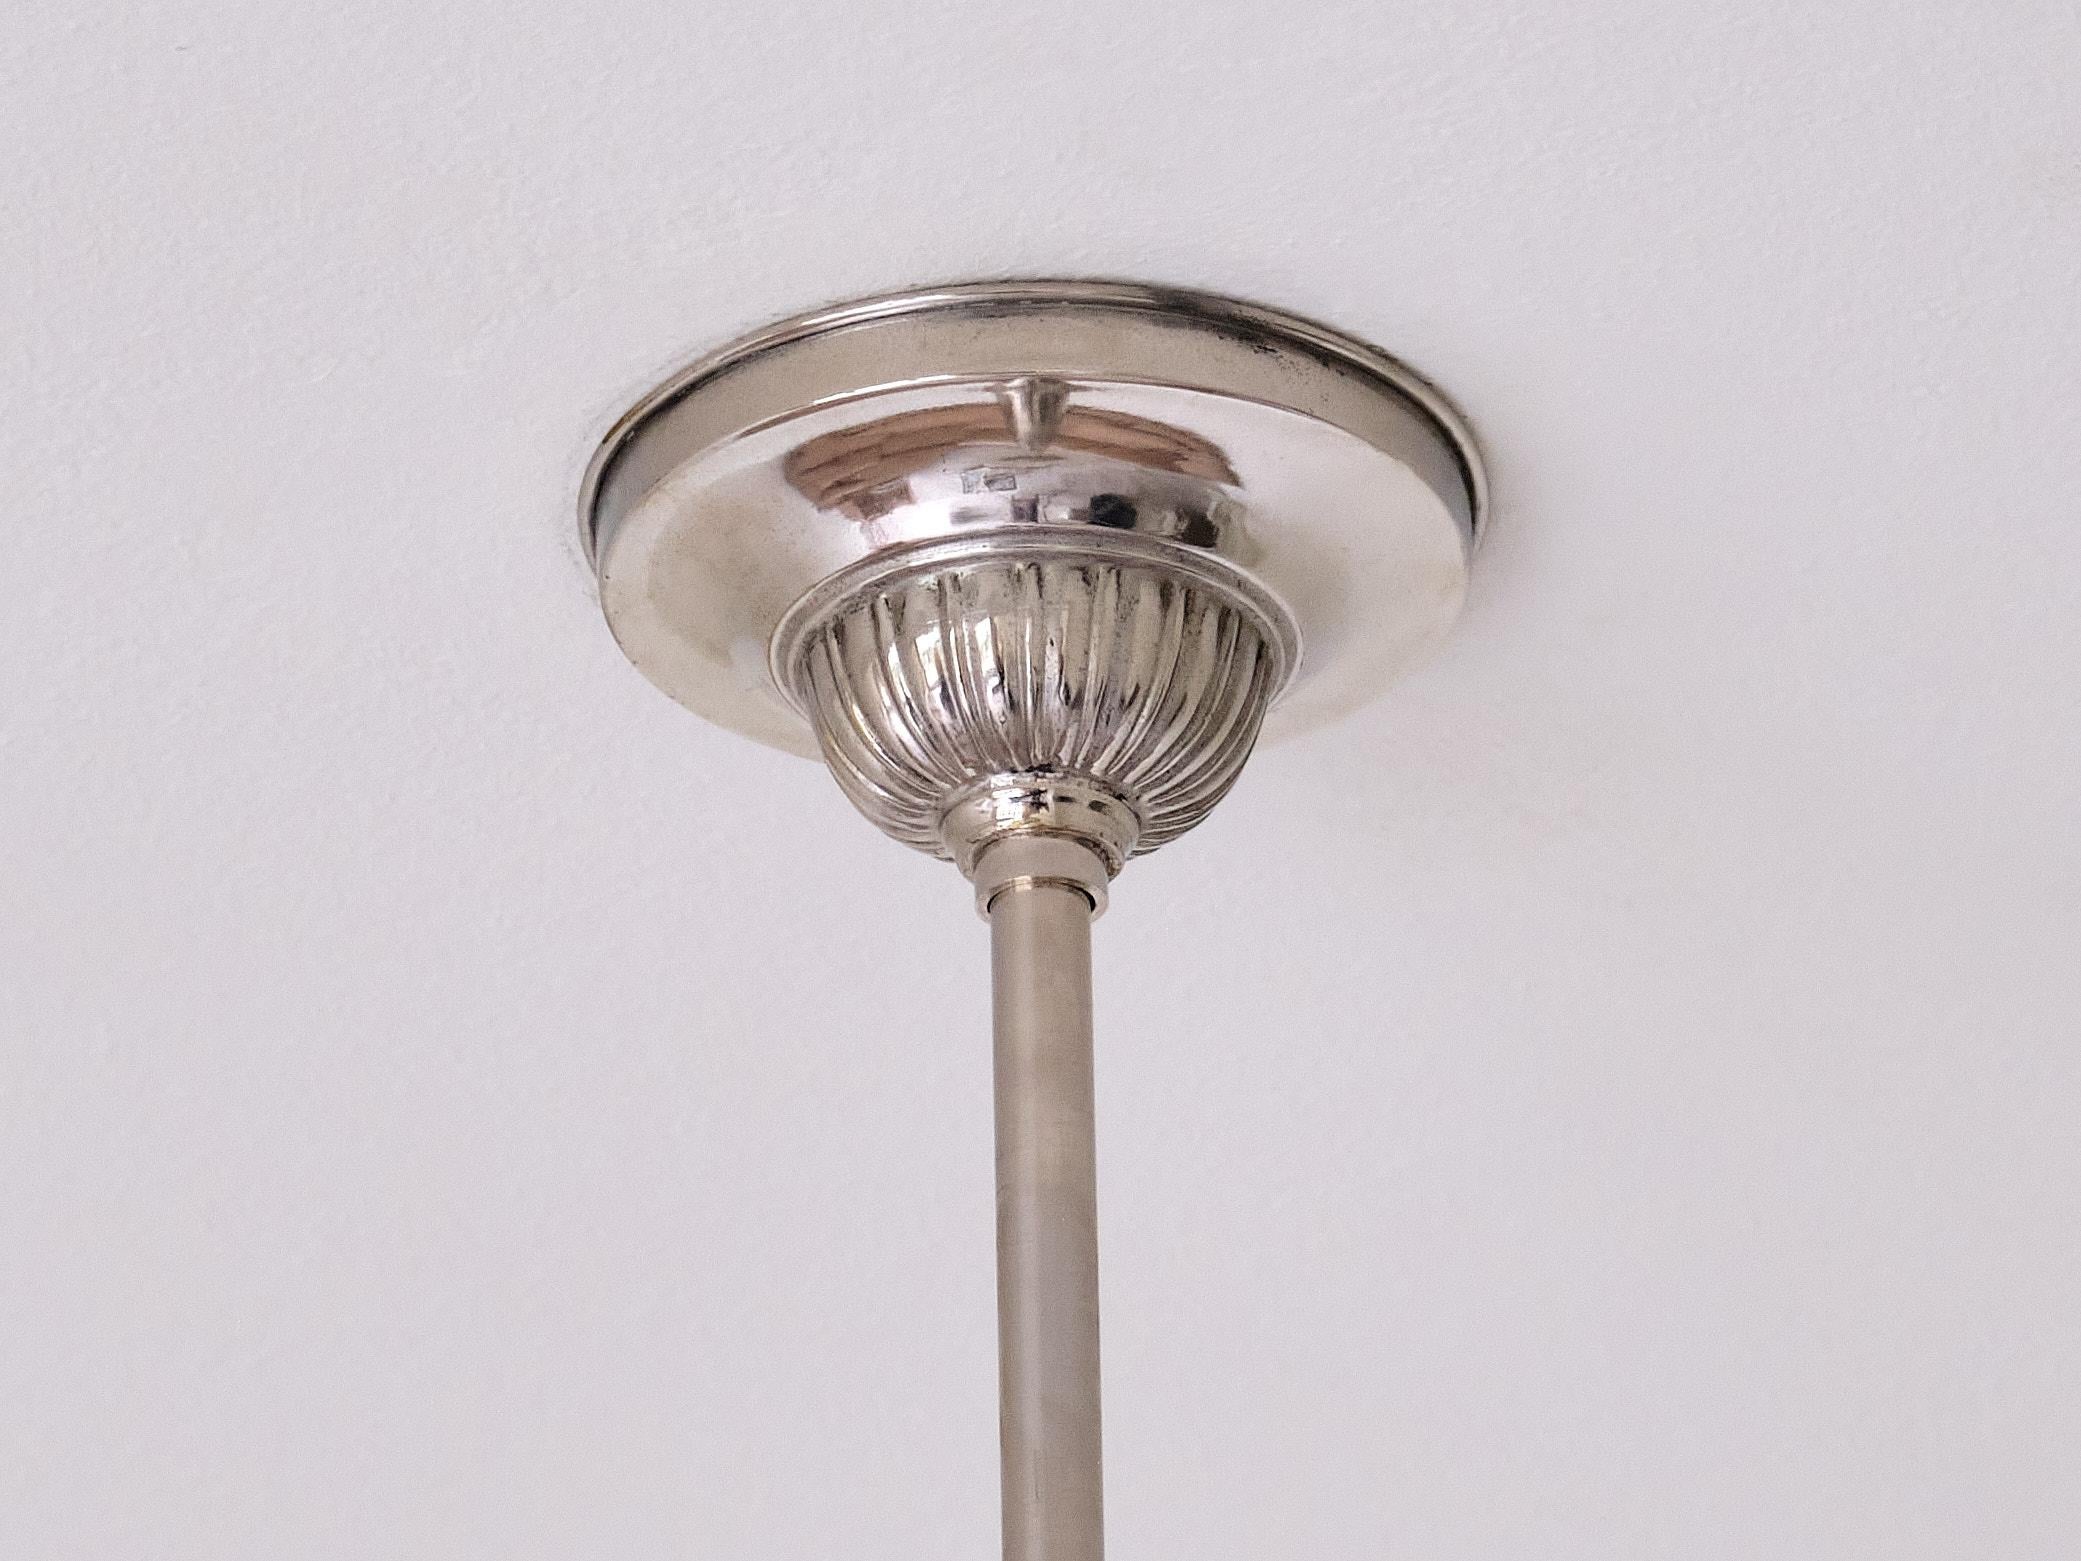 Gispen Art Deco Tiered Pendant Light in Opal Glass and Nickel, Netherlands, 1950 For Sale 1